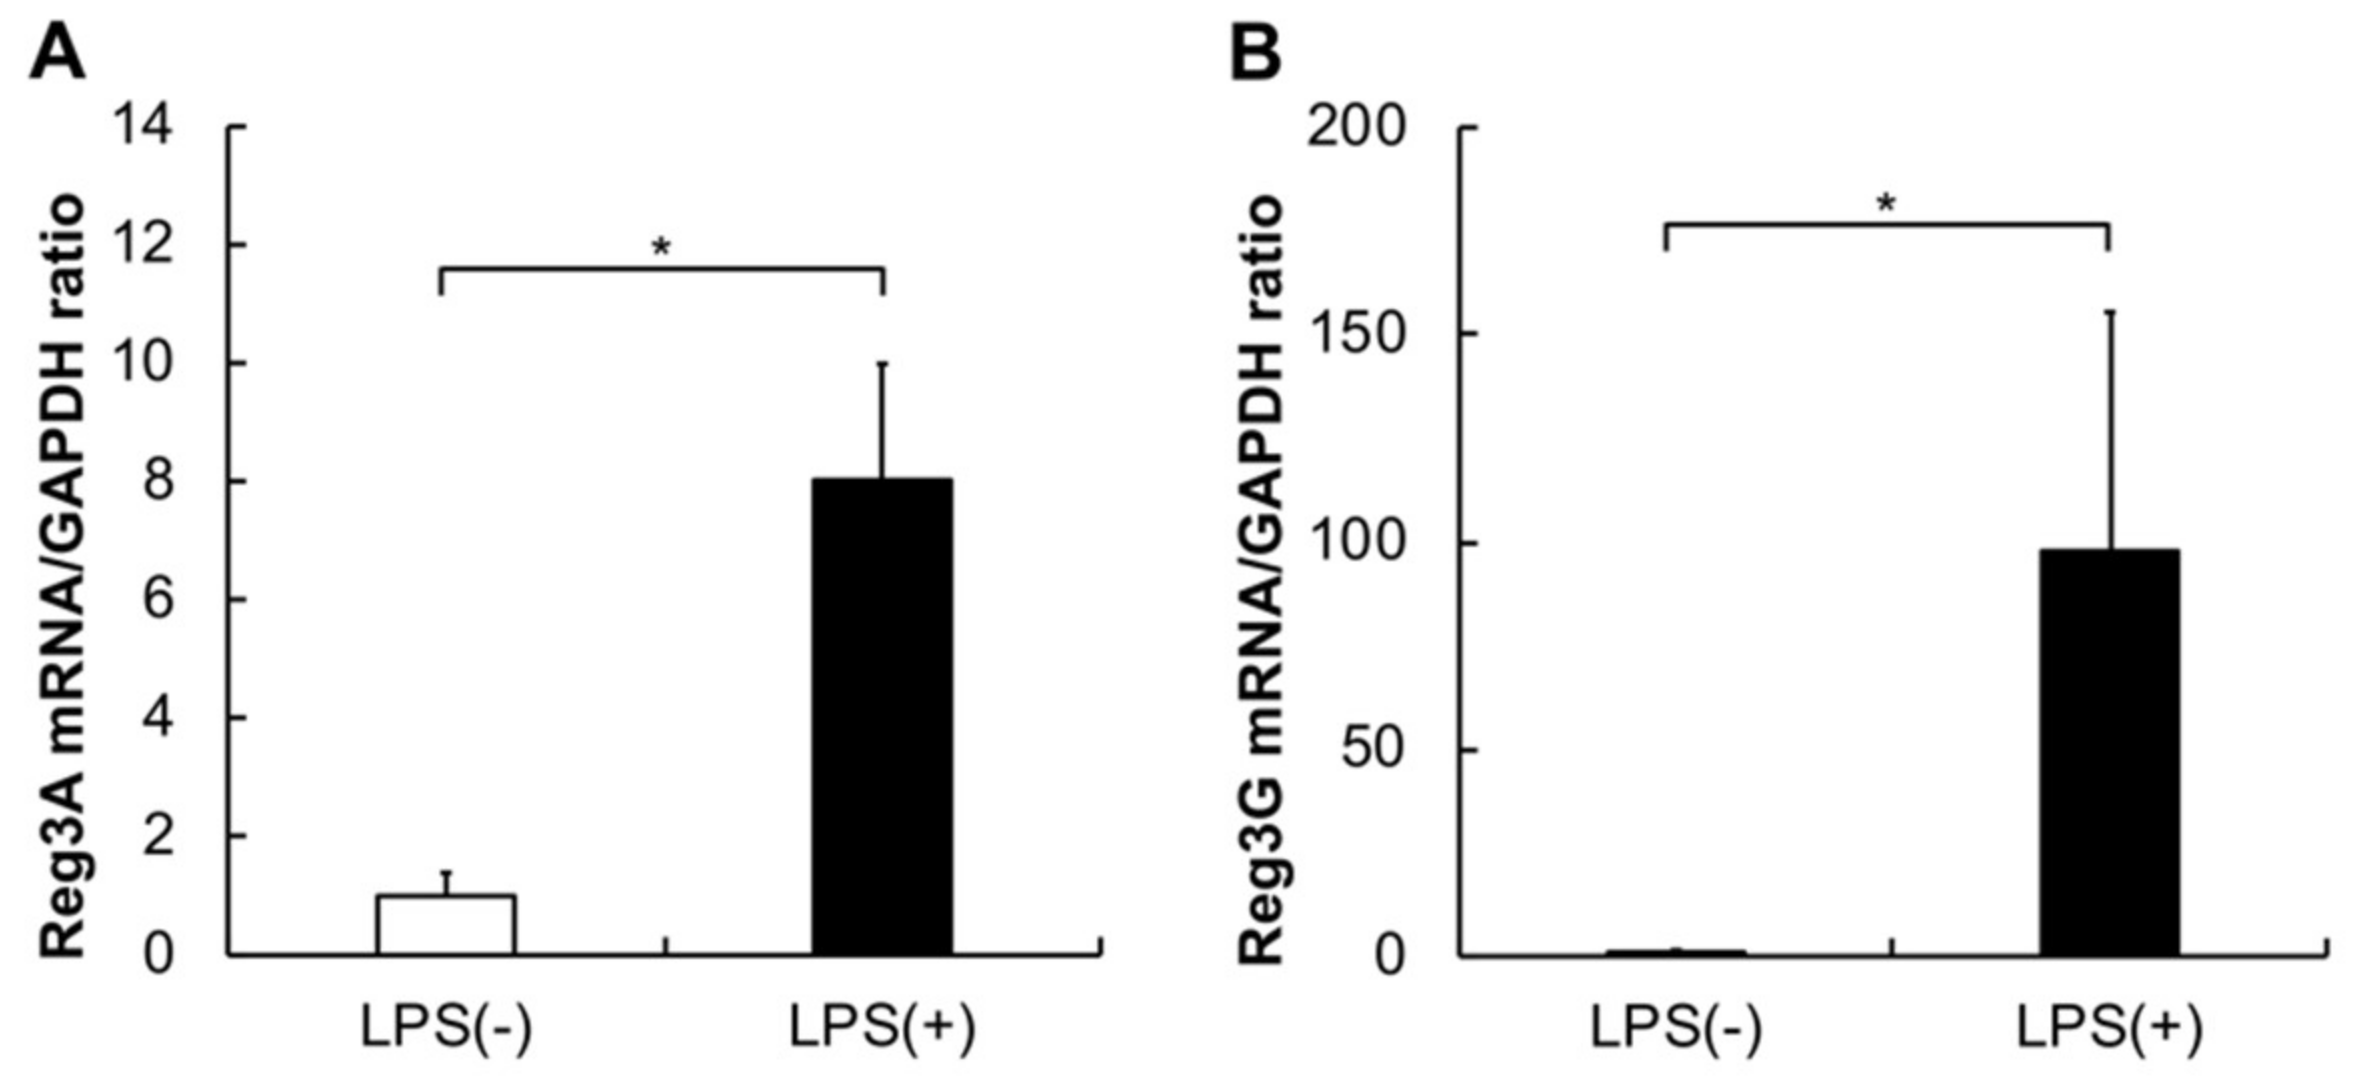 IJMS | Free Full-Text | P. gingivalis Lipopolysaccharide Stimulates the  Upregulated Expression of the Pancreatic Cancer-Related Genes Regenerating  Islet-Derived 3 A/G in Mouse Pancreas